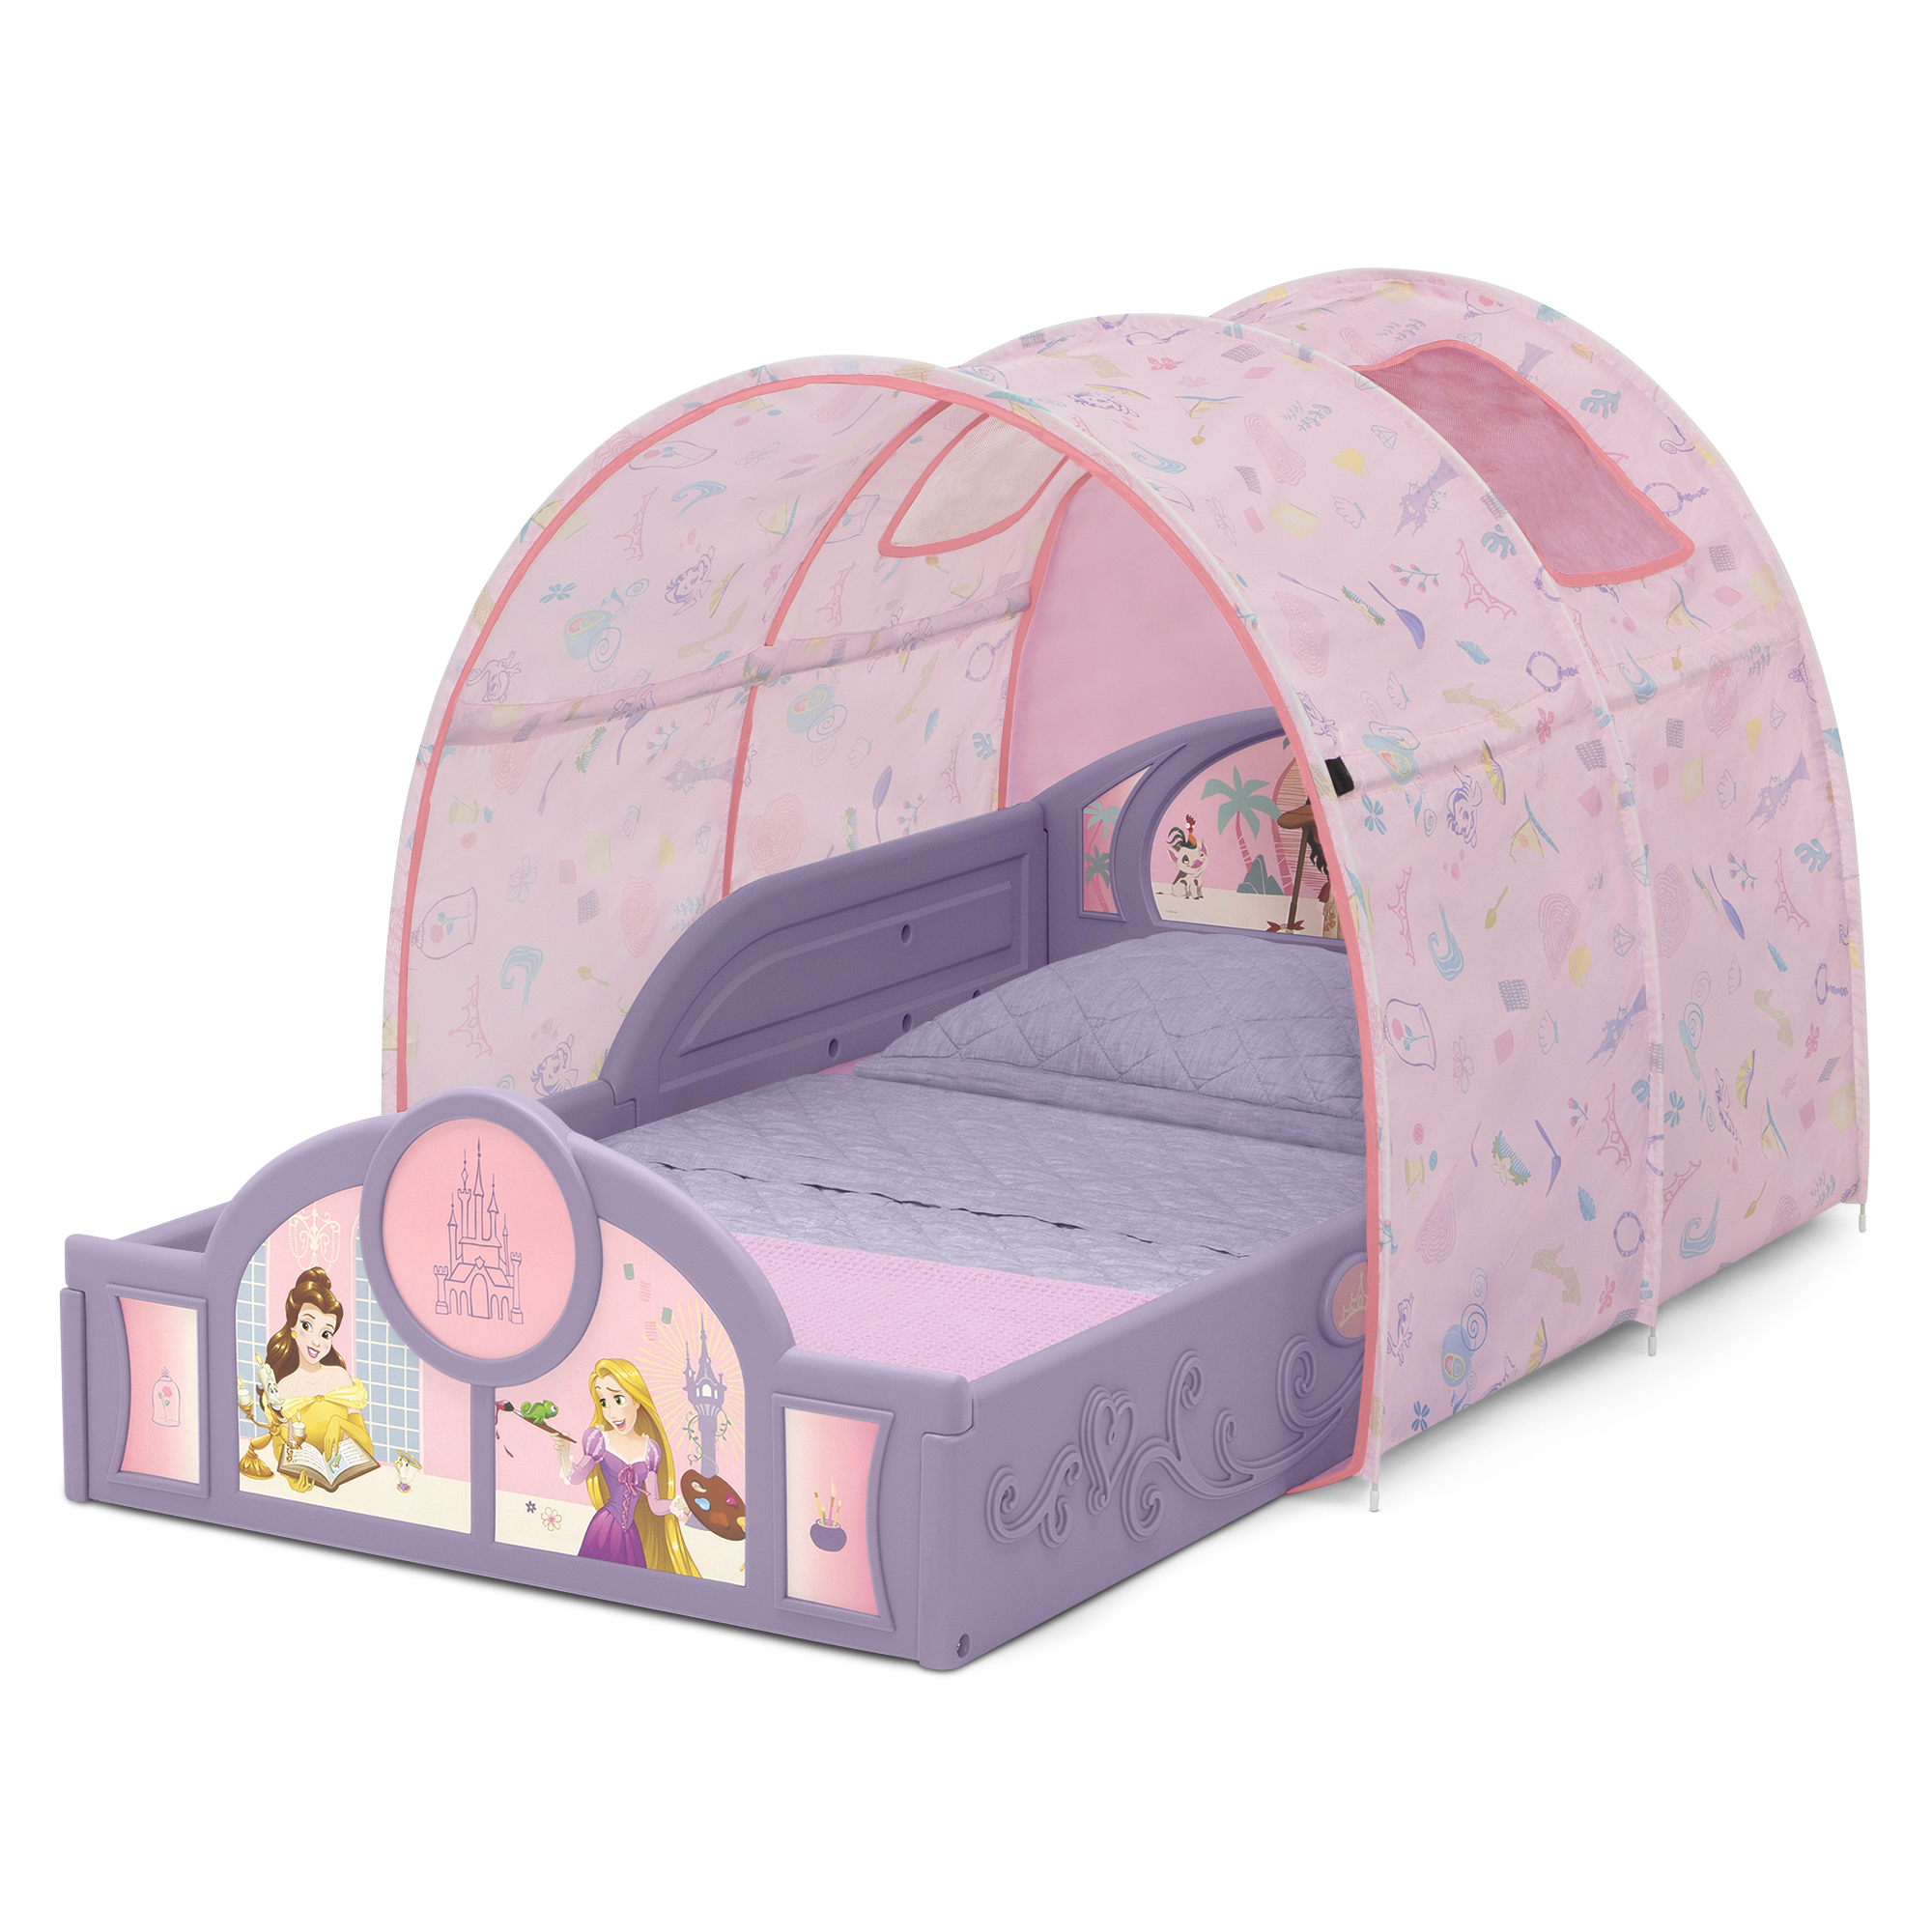 Disney Princess Sleep and Play Toddler Bed with Tent by Delta Children, Purple/Pink - image 3 of 7